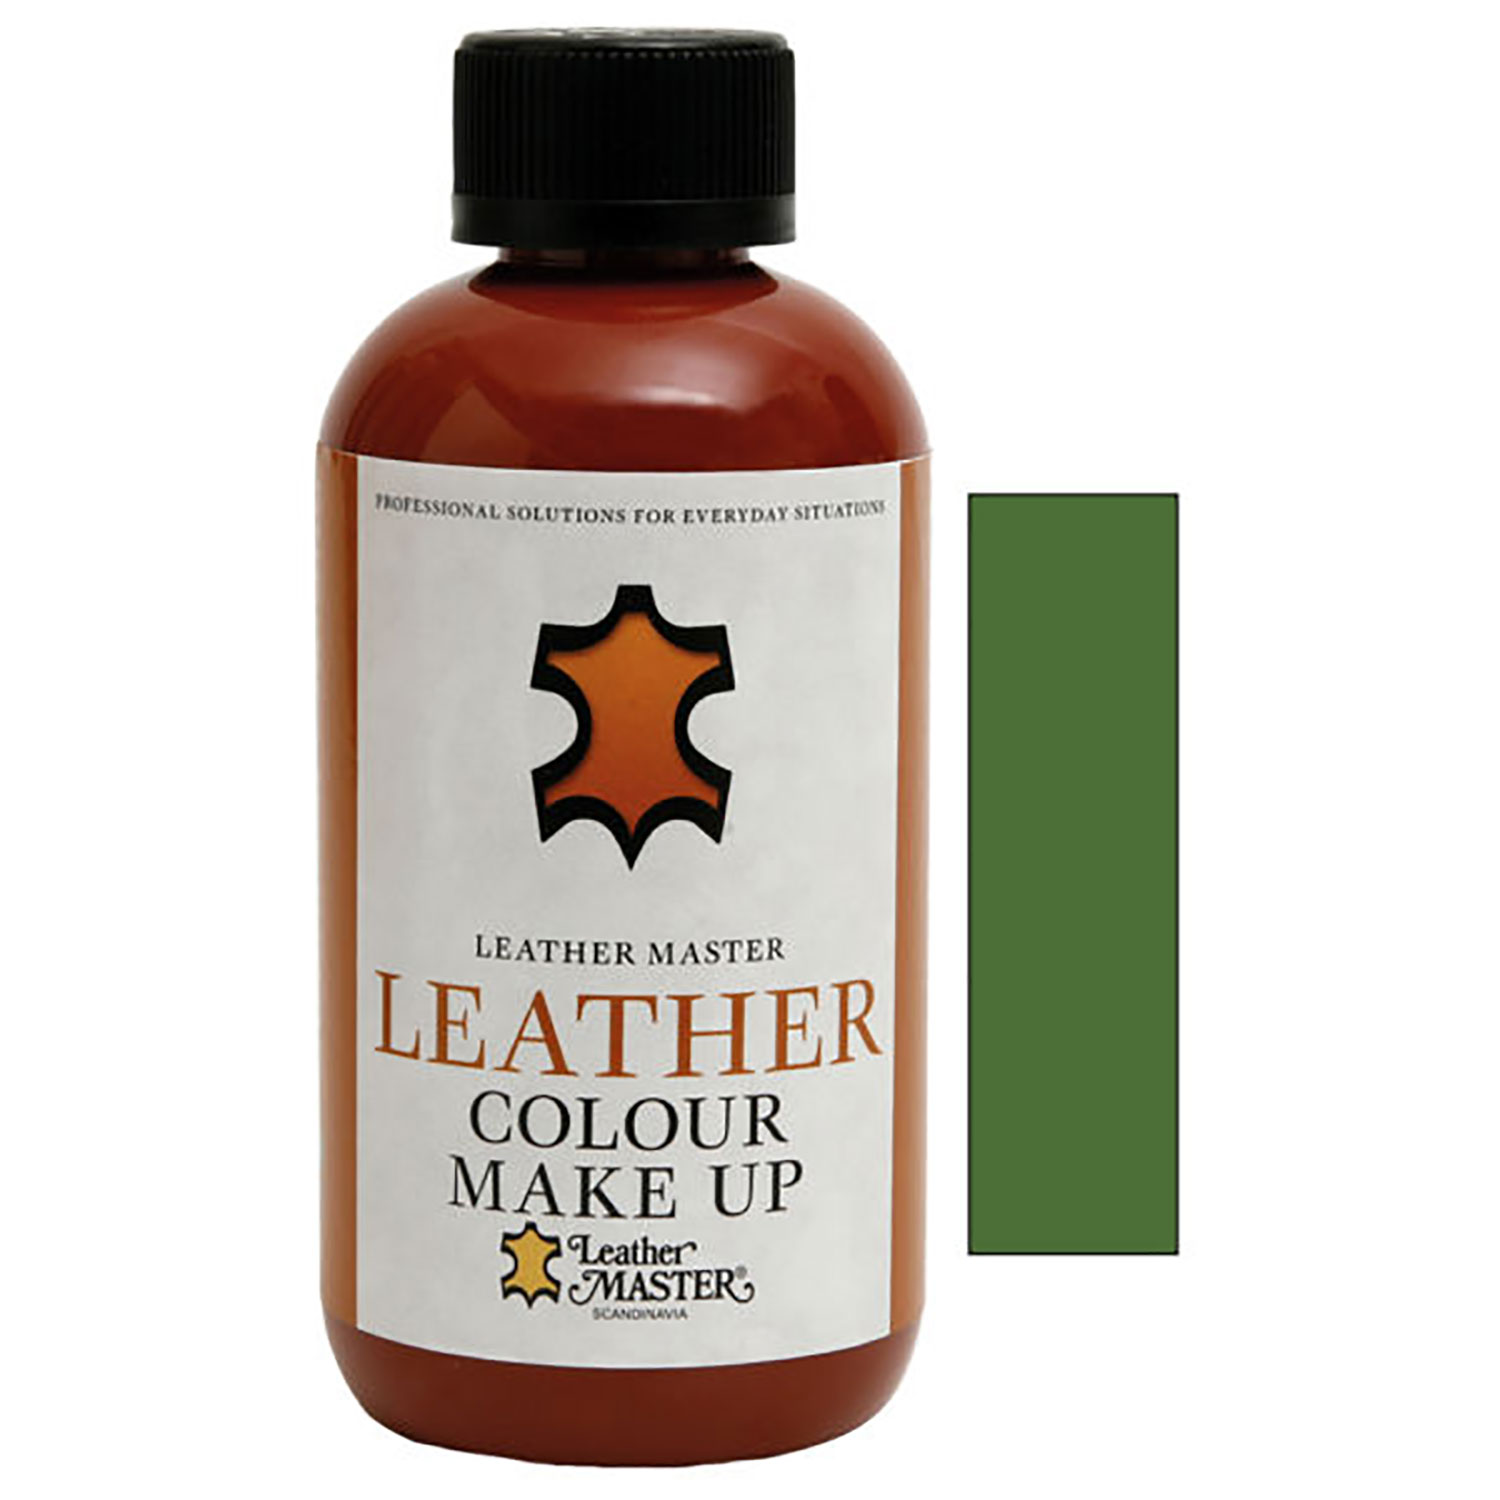 Leather Master Colour make up – olive green 250 ml